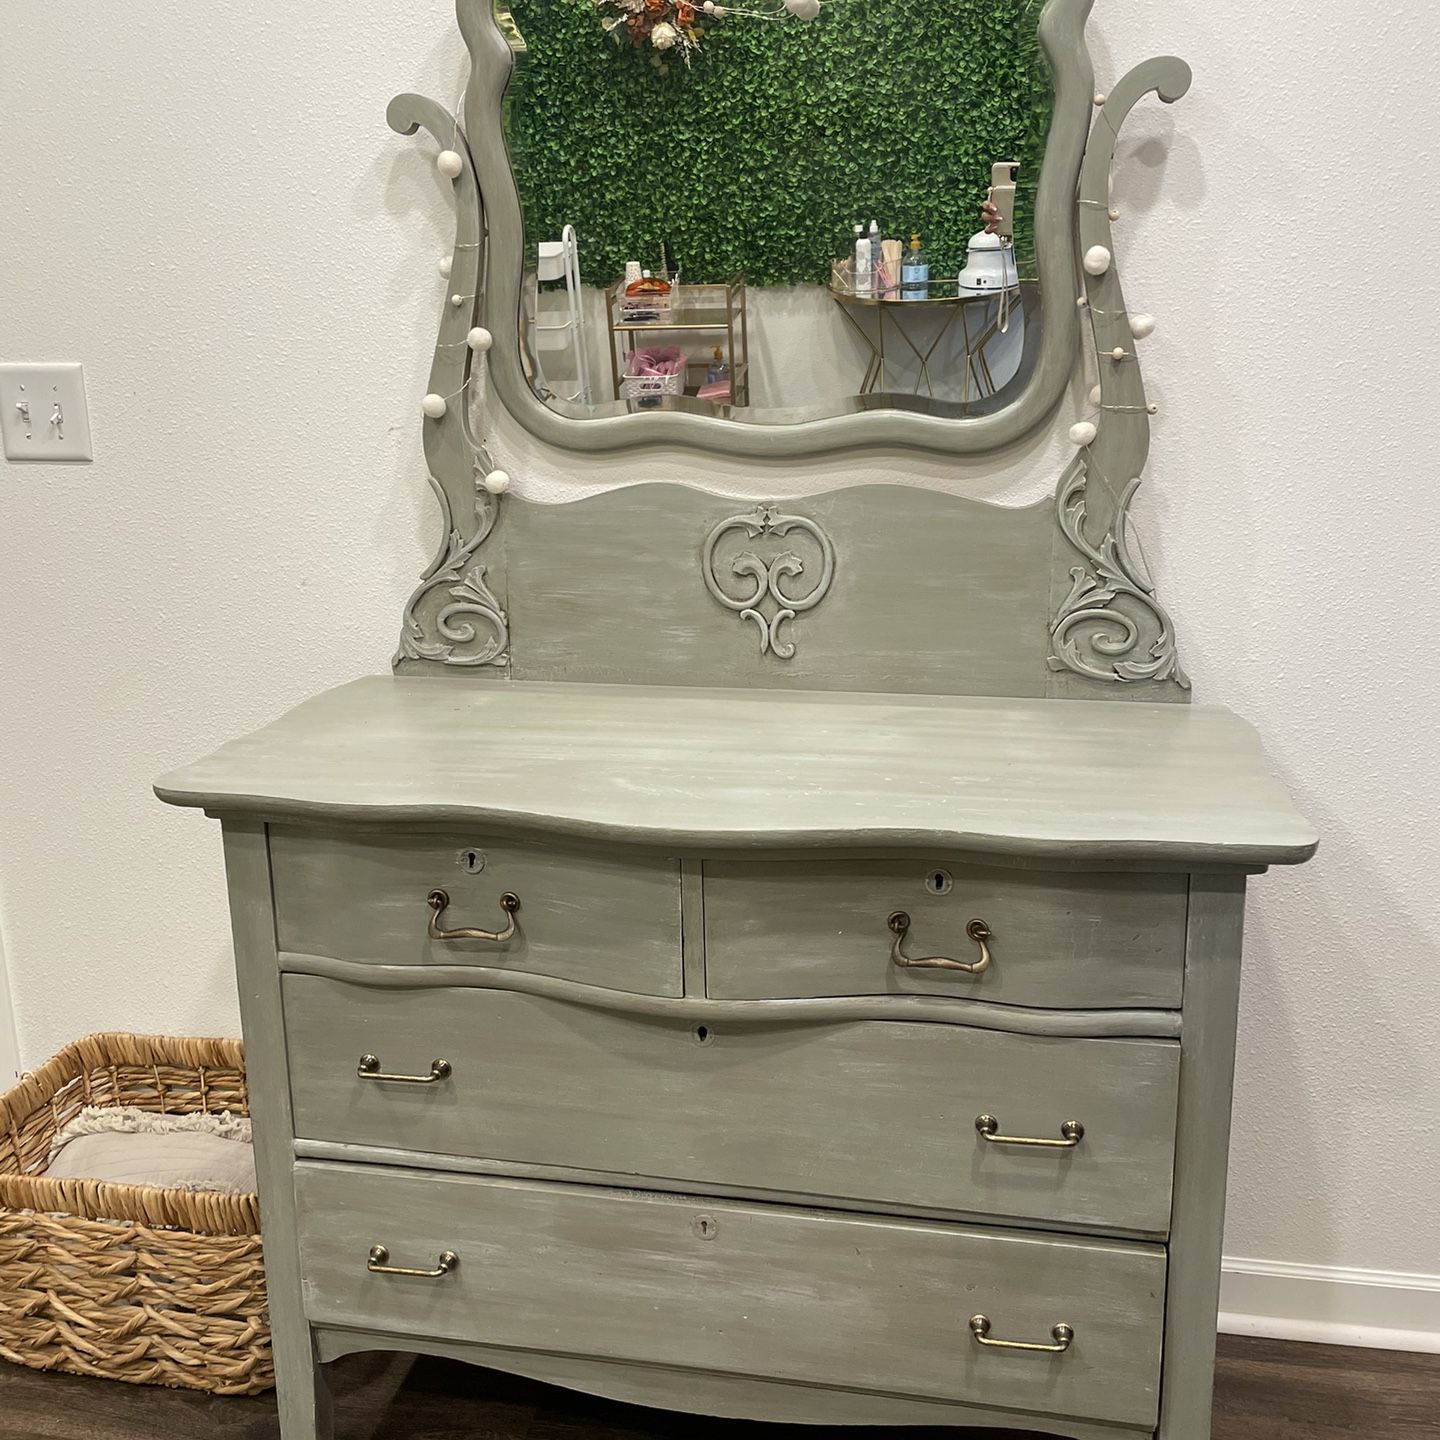 Perfect Condition! Refinished Vintage Dresser and Mirror in Green